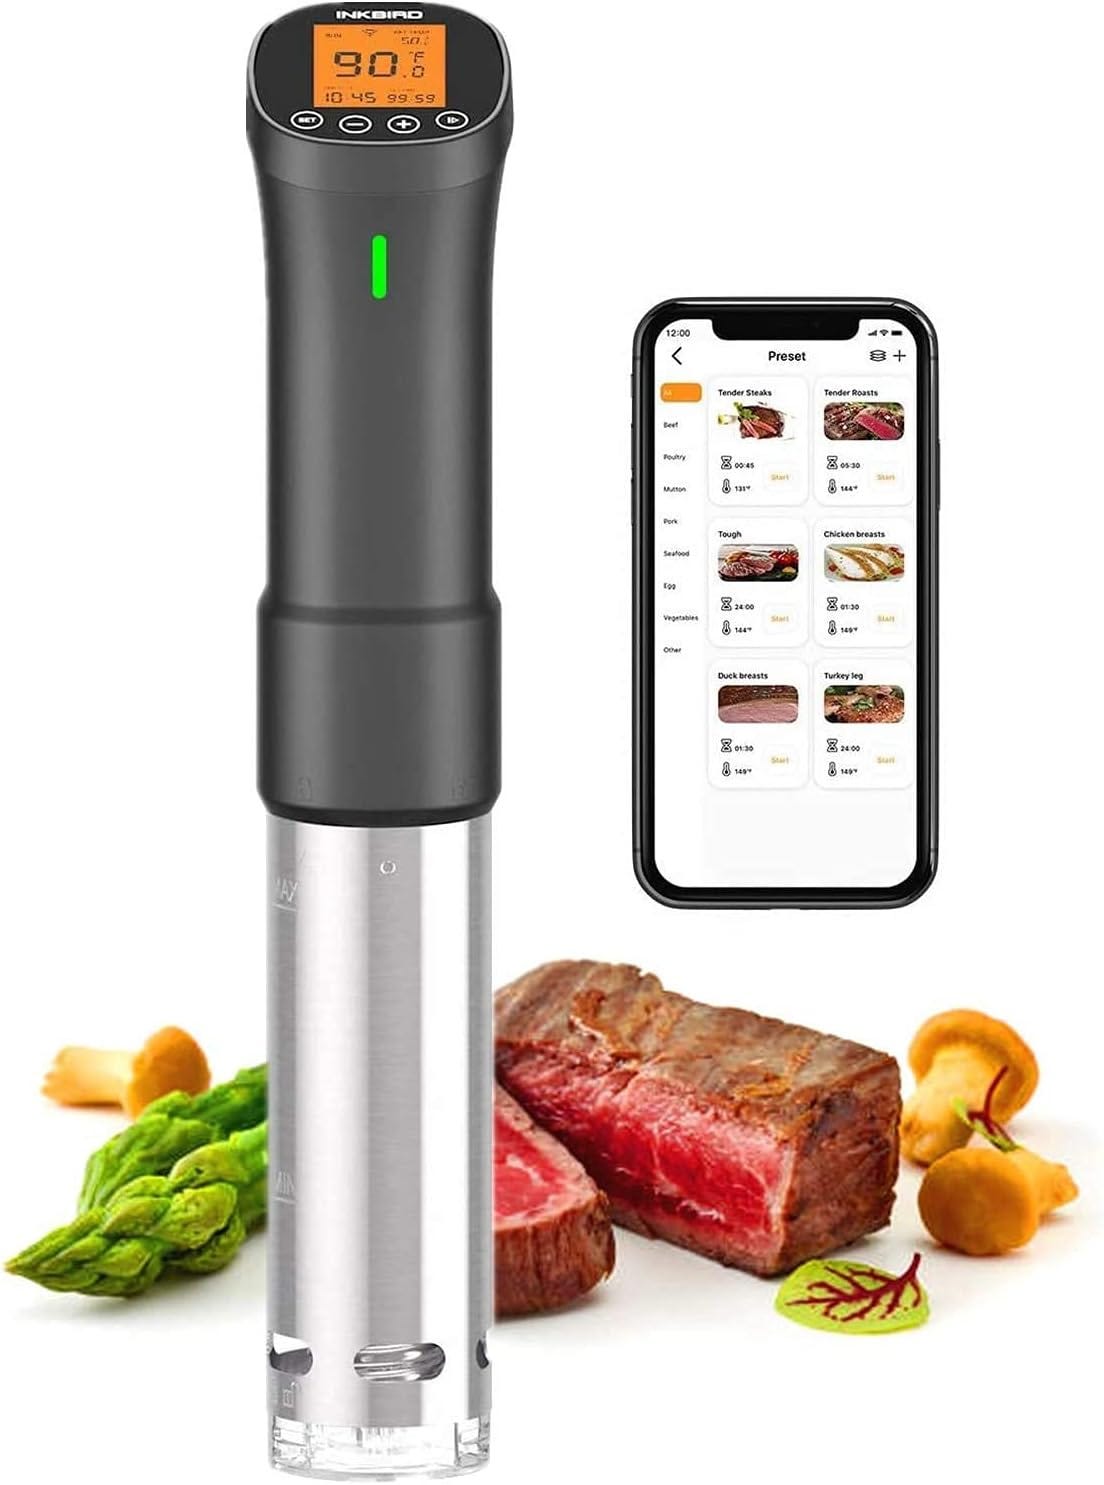 Elevate your dishes with this smart pot stirrer